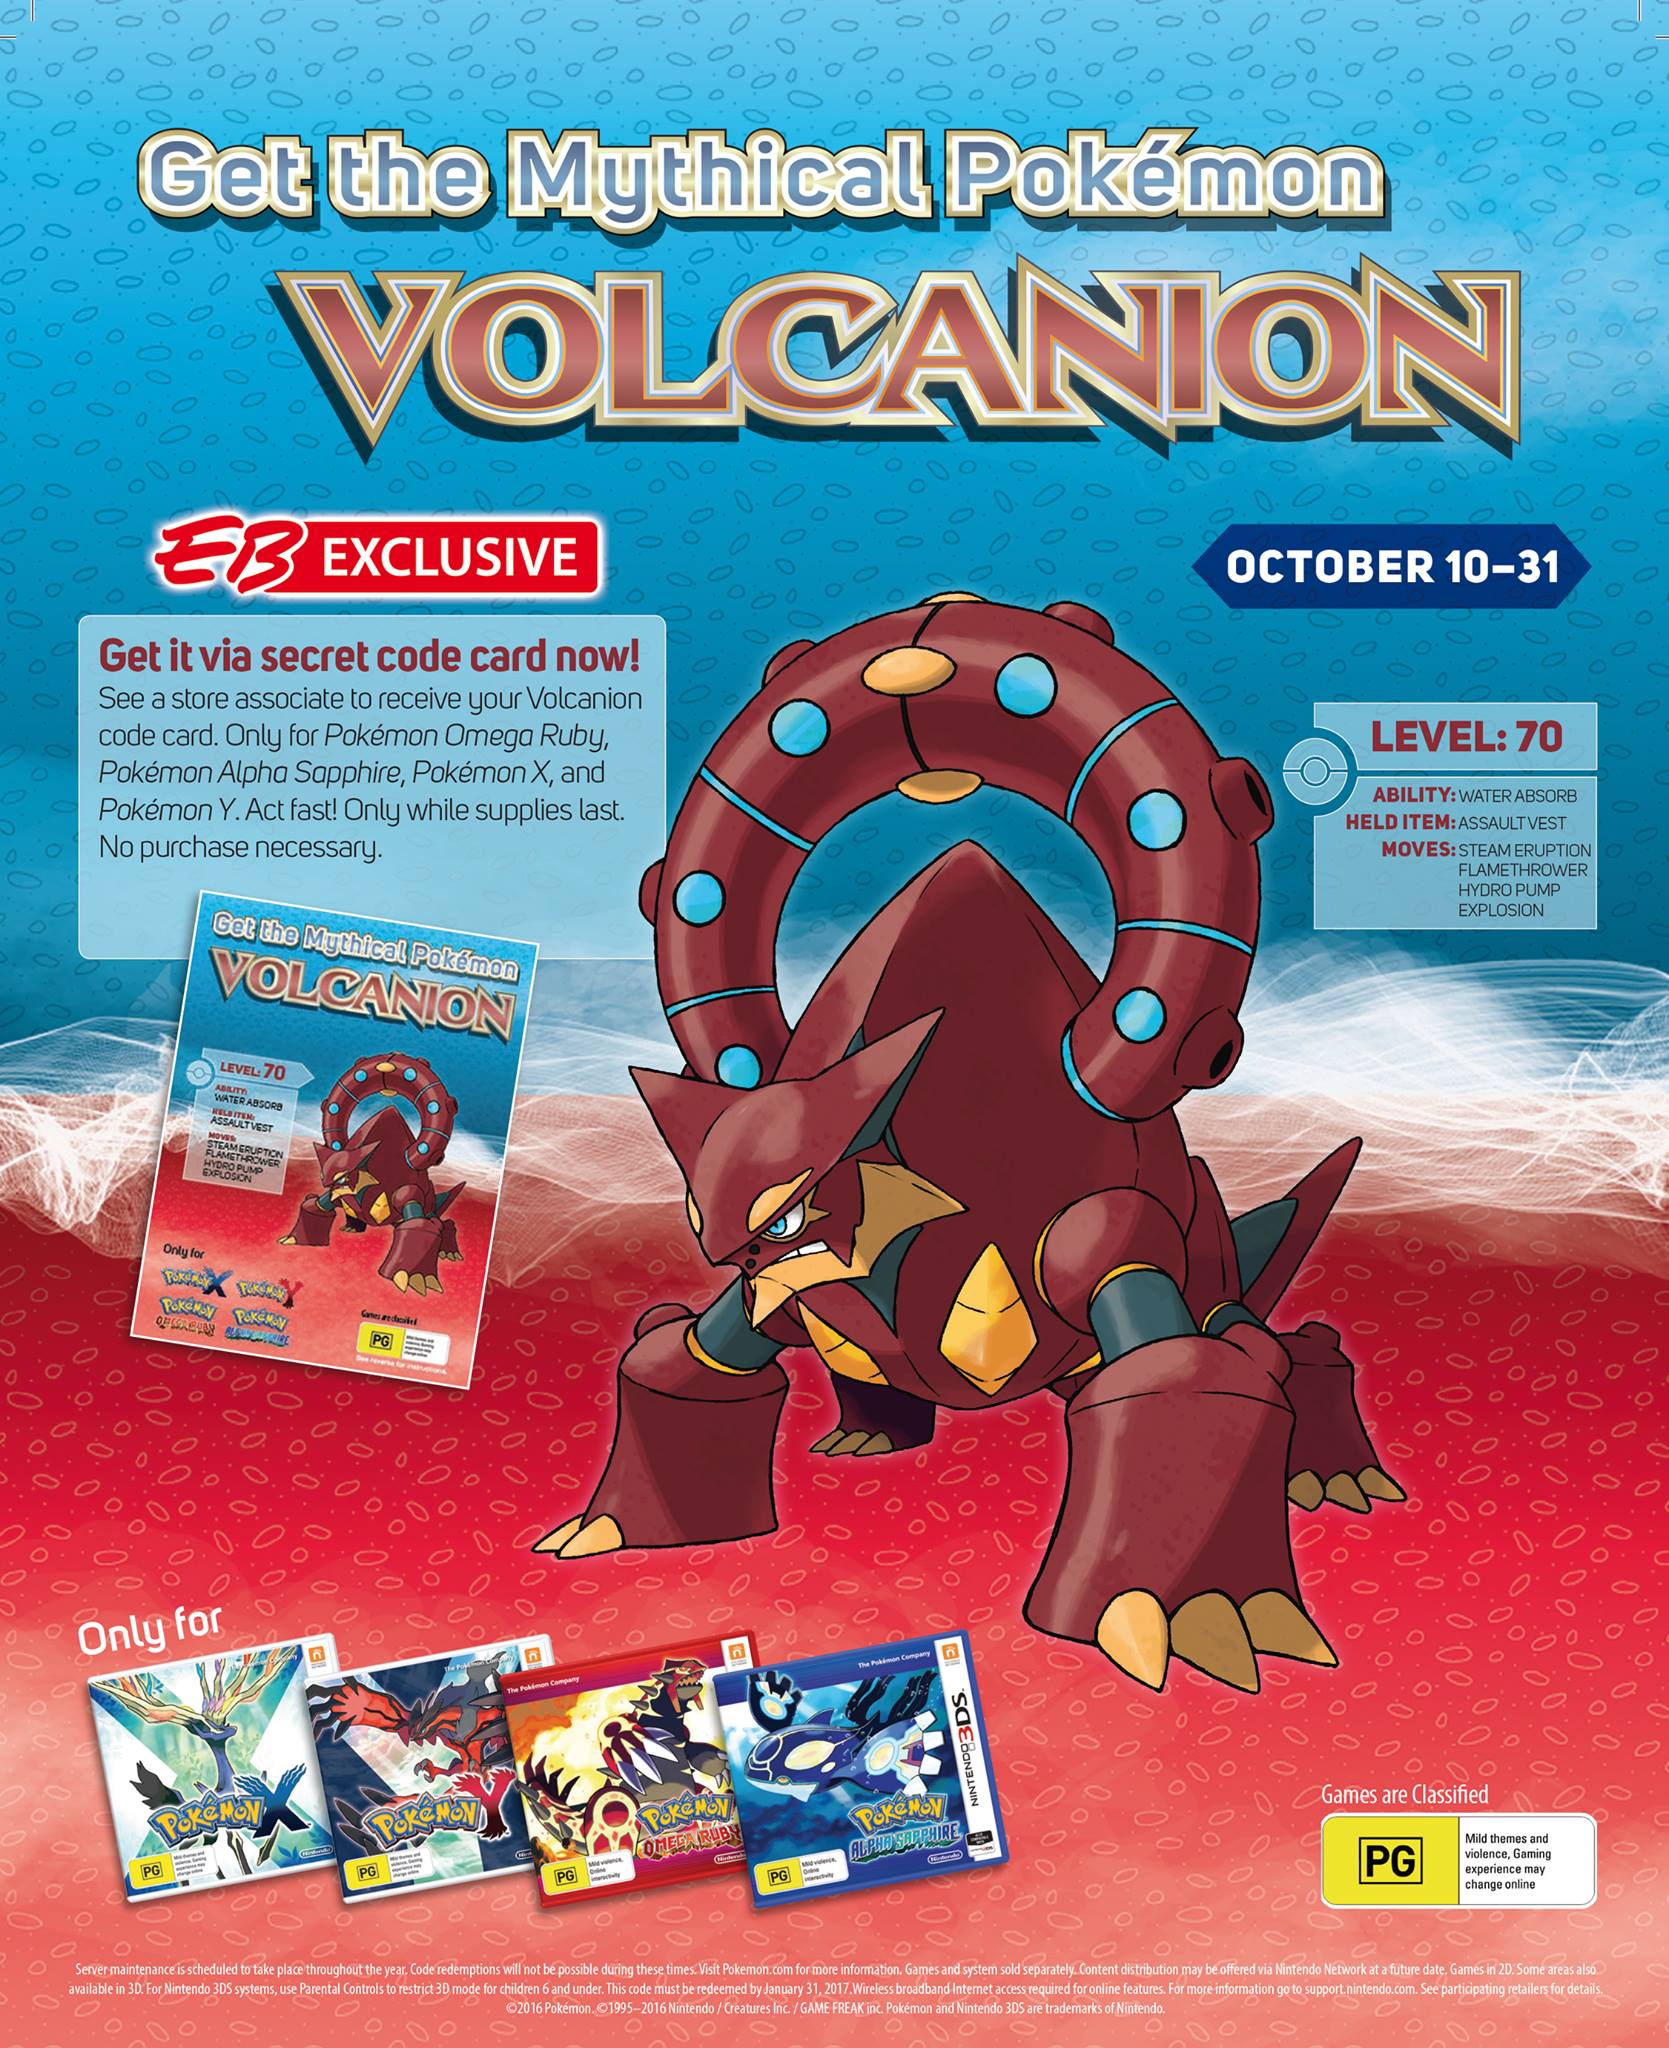 Get the Mythical Volcanion at your local GameStop